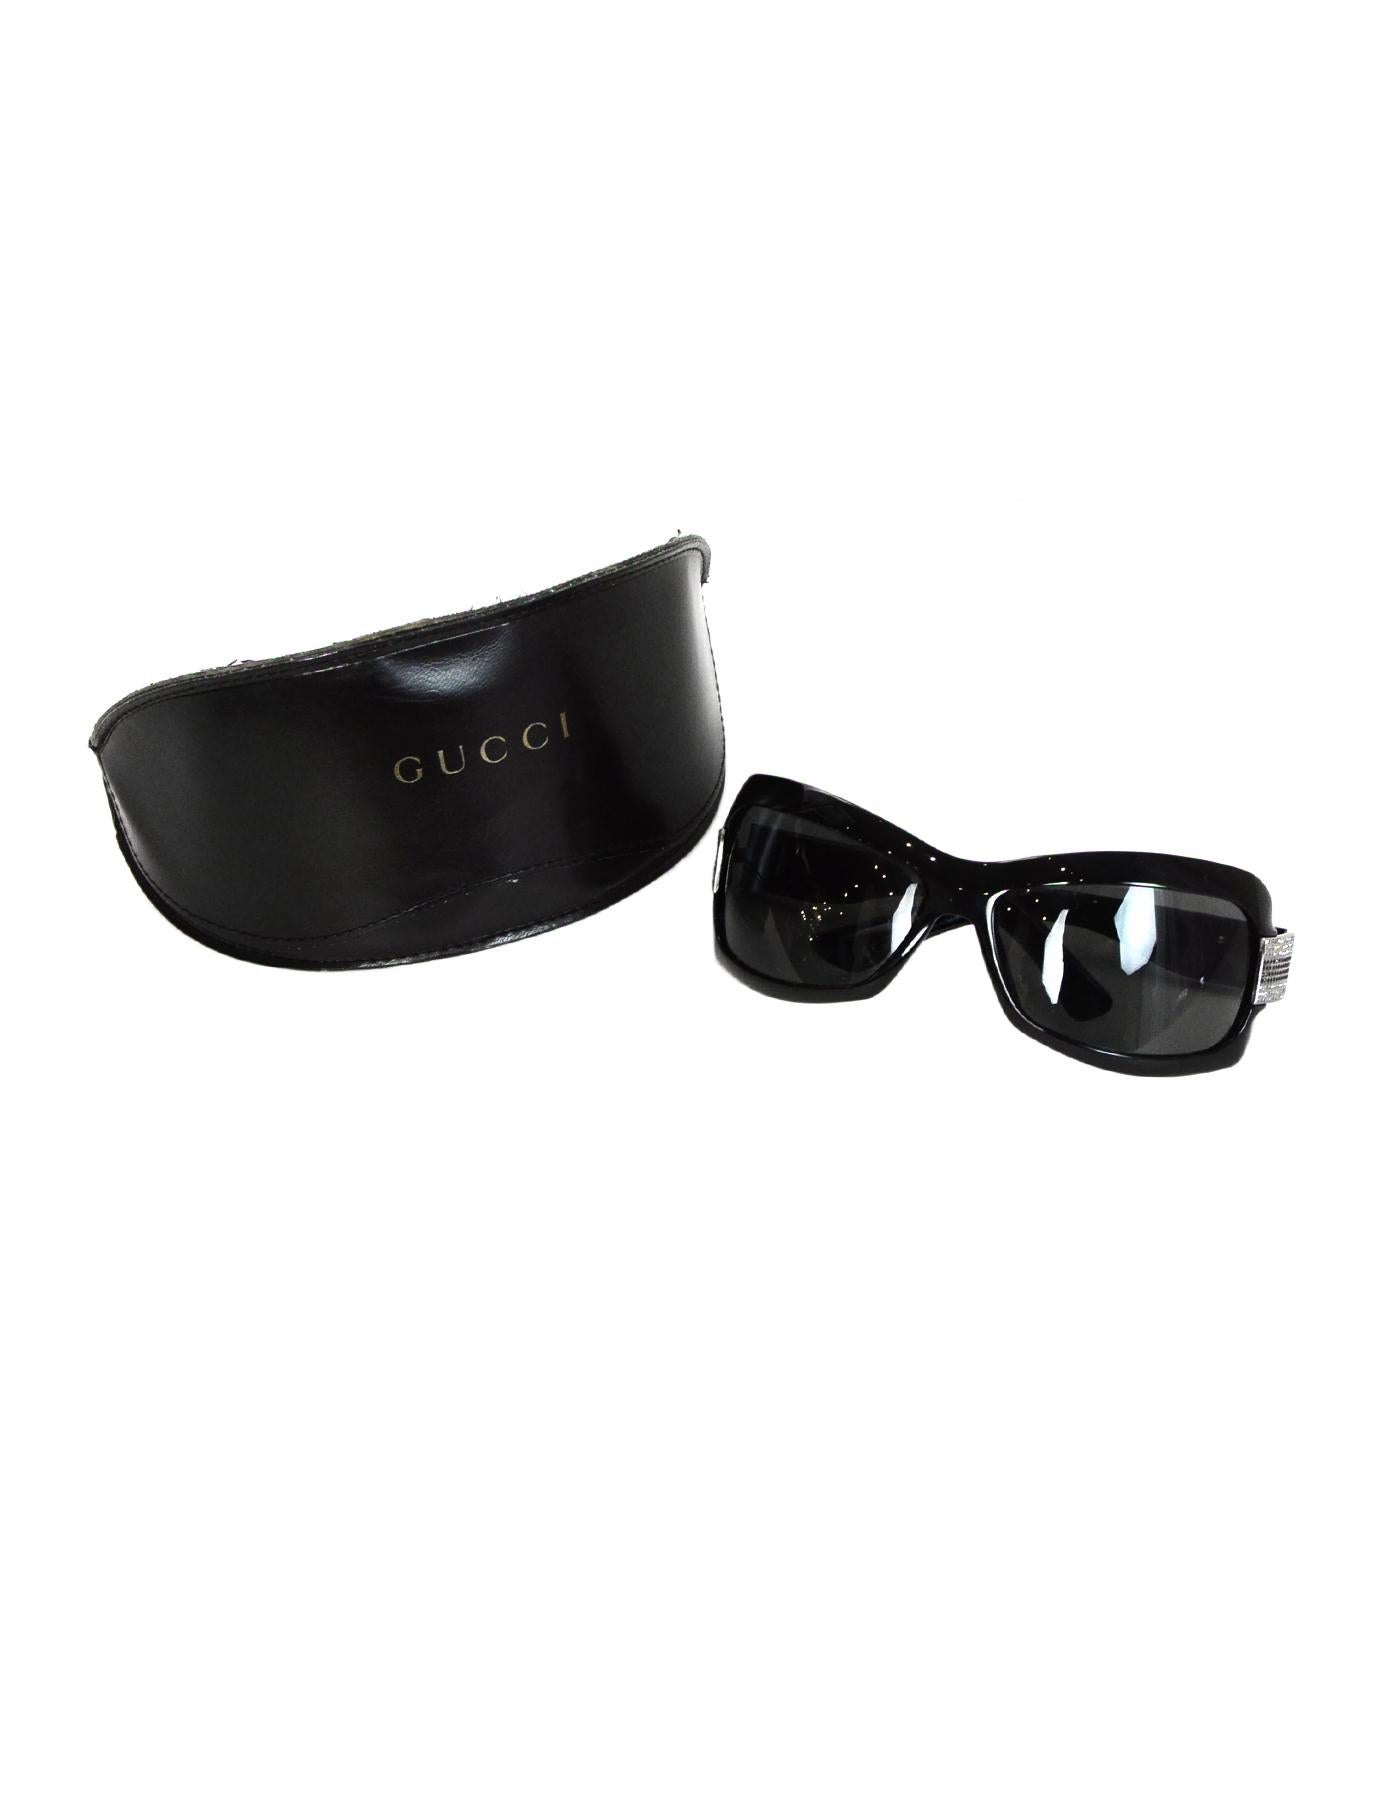 Gucci Black Sunglasses W/ Rhinestones On Arms & Case

Made In: Italy
Color: Black and silvertone
Hardware: Silvertone and rhinestones
Materials: Plastic, metal and rhinestones
Overall Condition: Excellent pre-owned condition with exception of minor